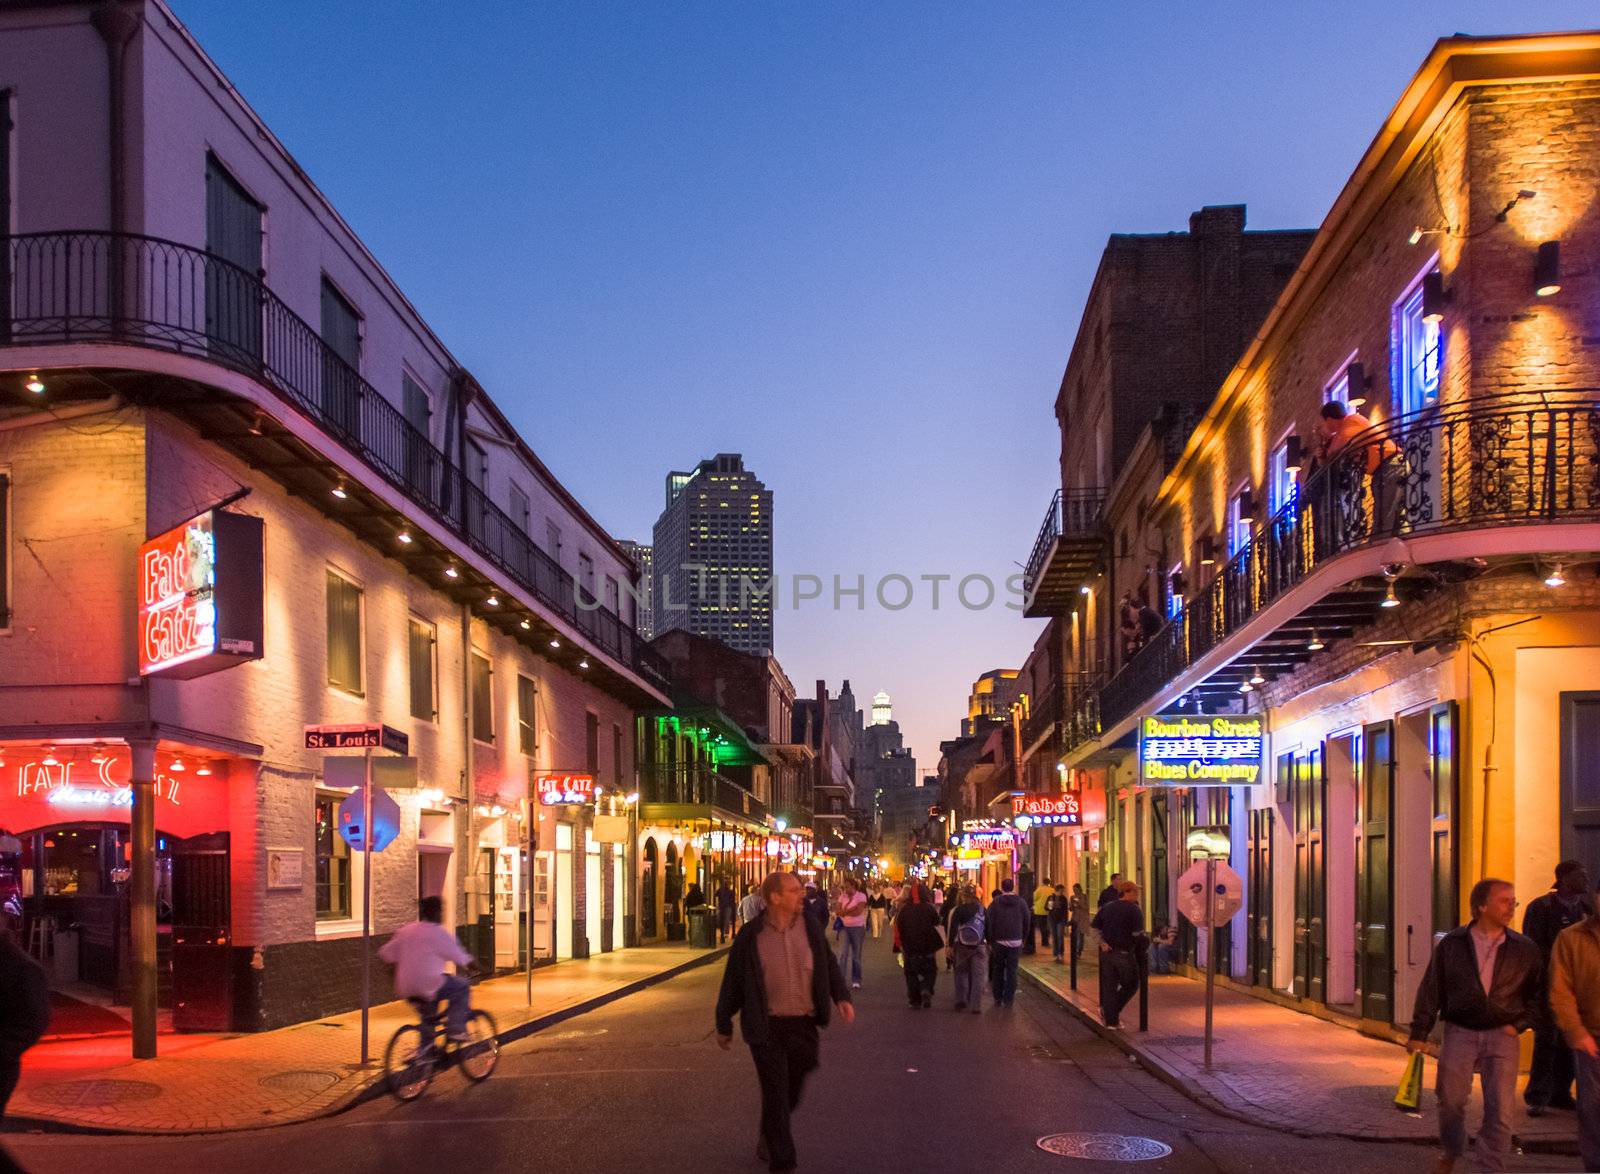 NEW ORLEANS, USA - CIRCA MARCH 2008: Crowds of people and neon lights at dusk circa March 2008 in New Orleans, USA. Tourism is the area's major source of income after Hurricane Katrina in 2005.